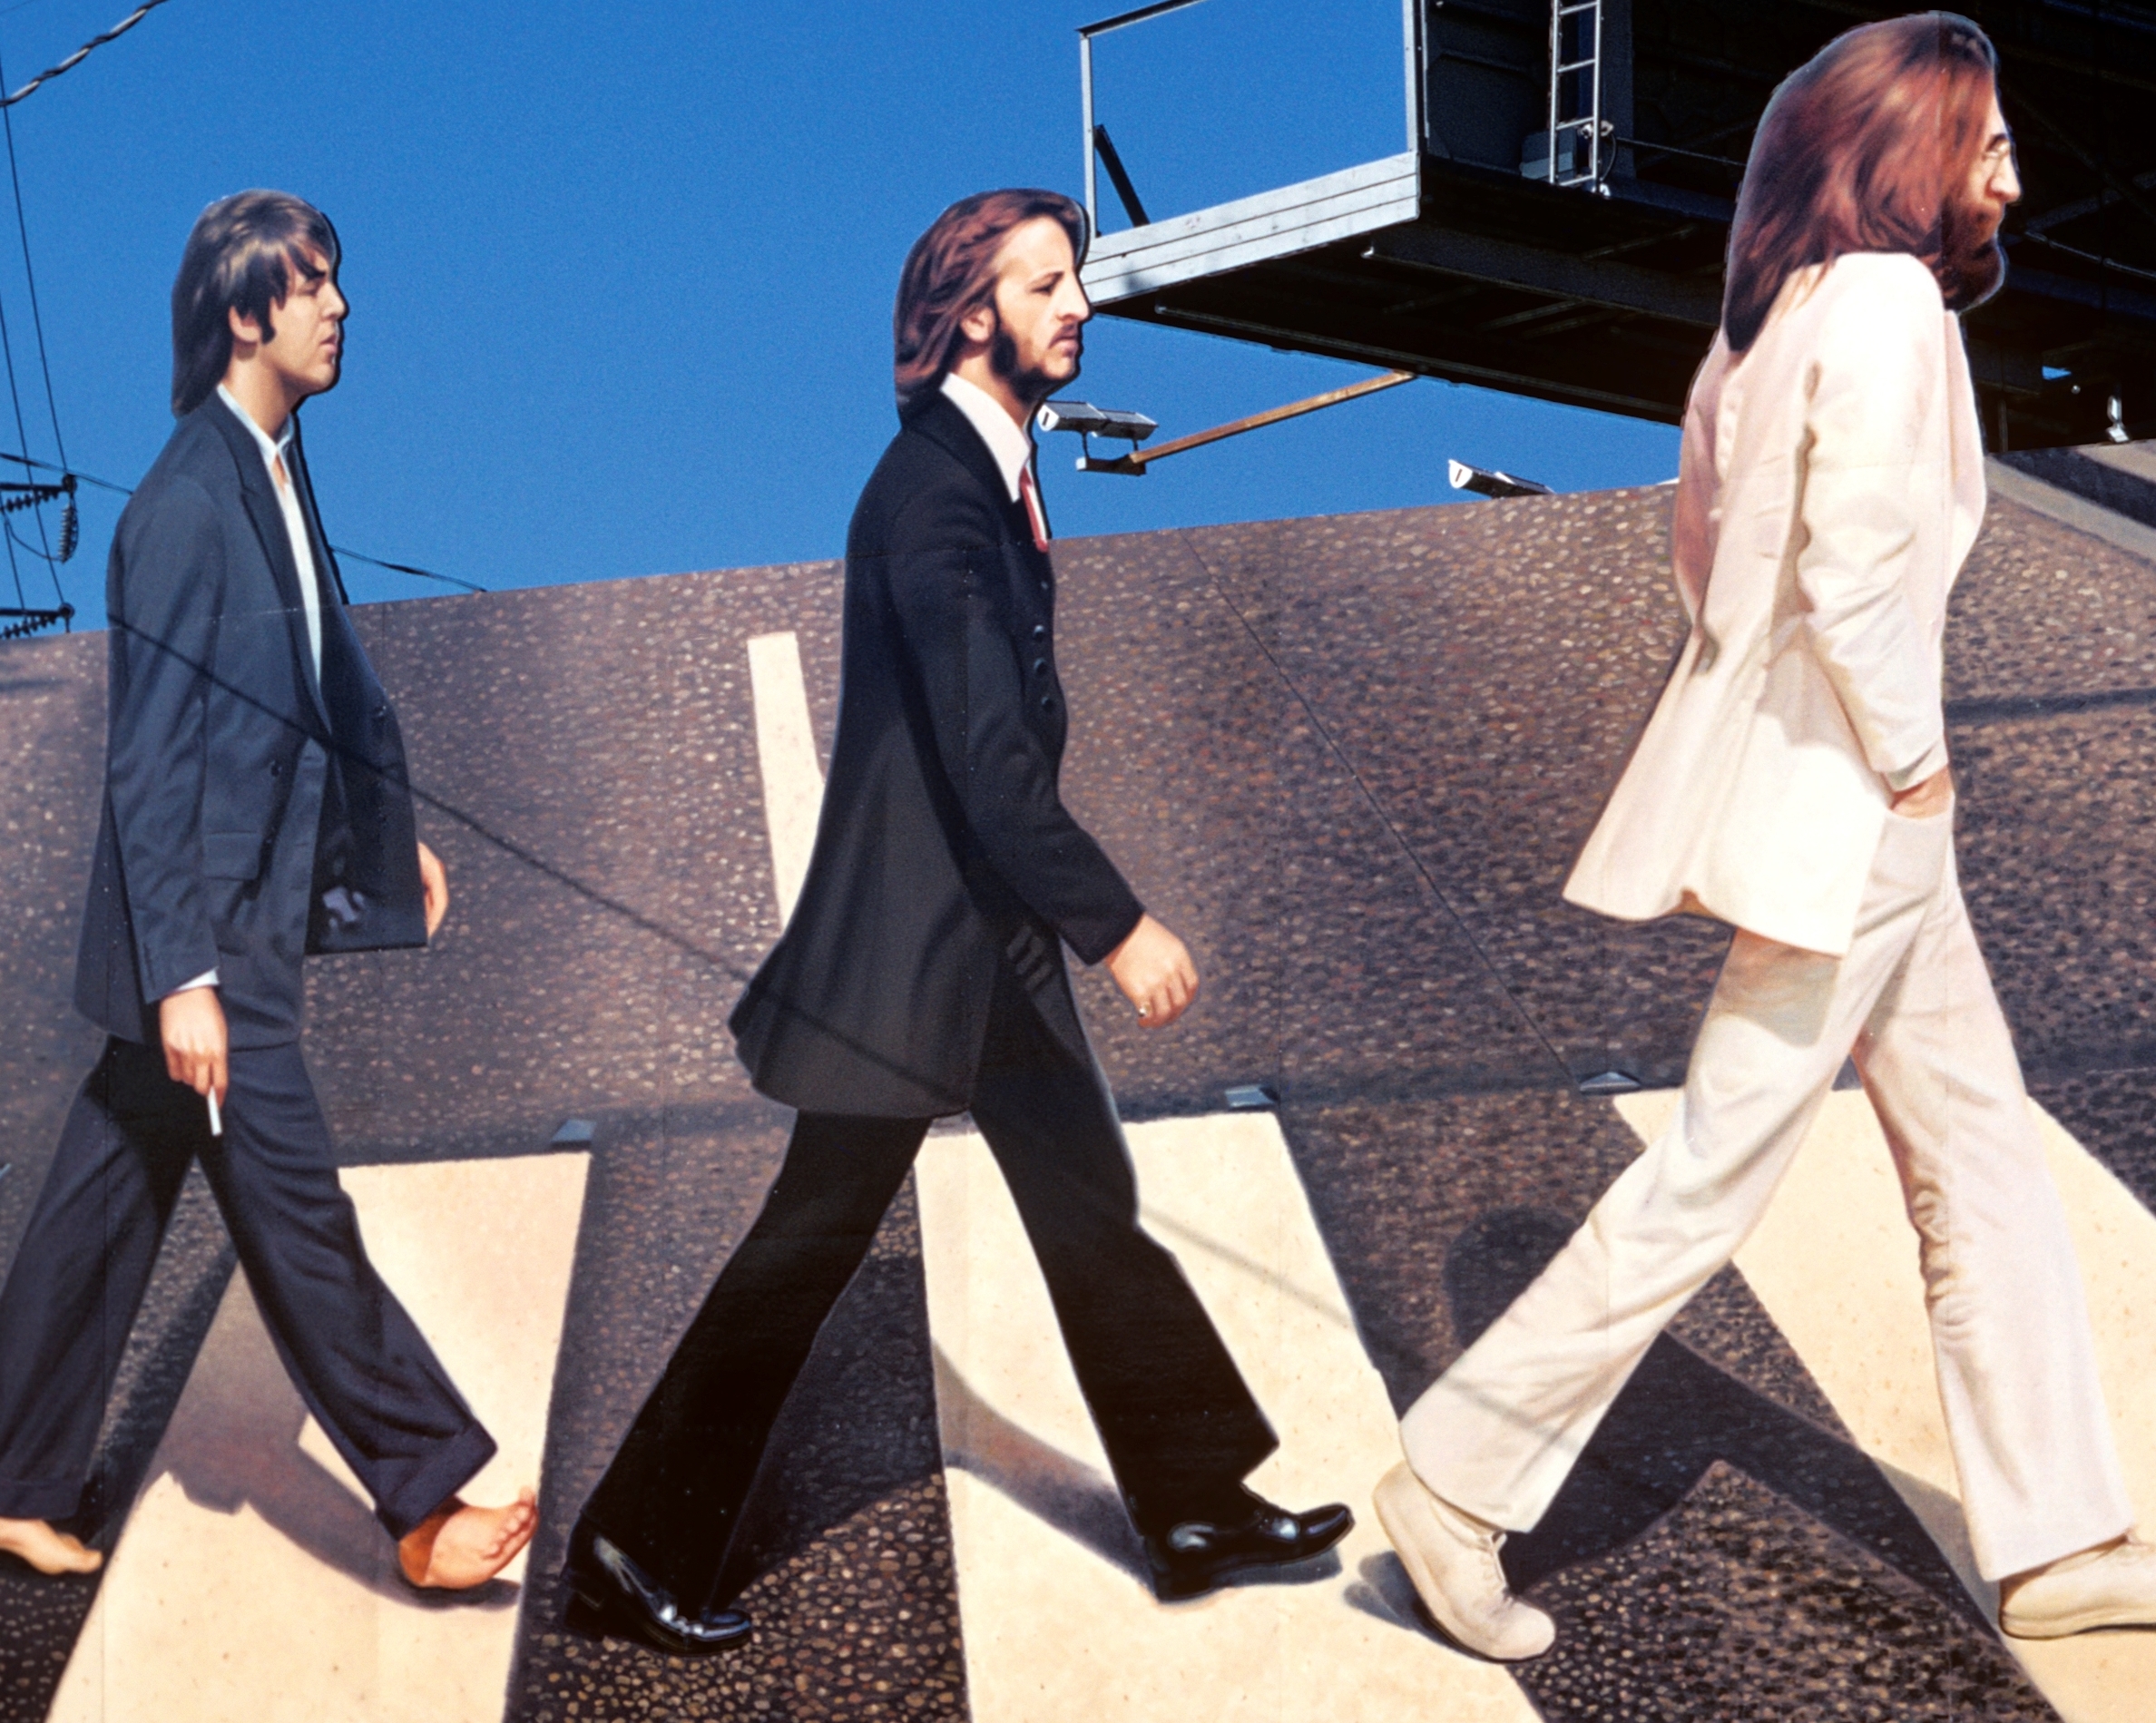 Paul McCartney, Ringo Starr, and John Lennon in a billboard based on the cover of The Beatles' 'Abbey Road'